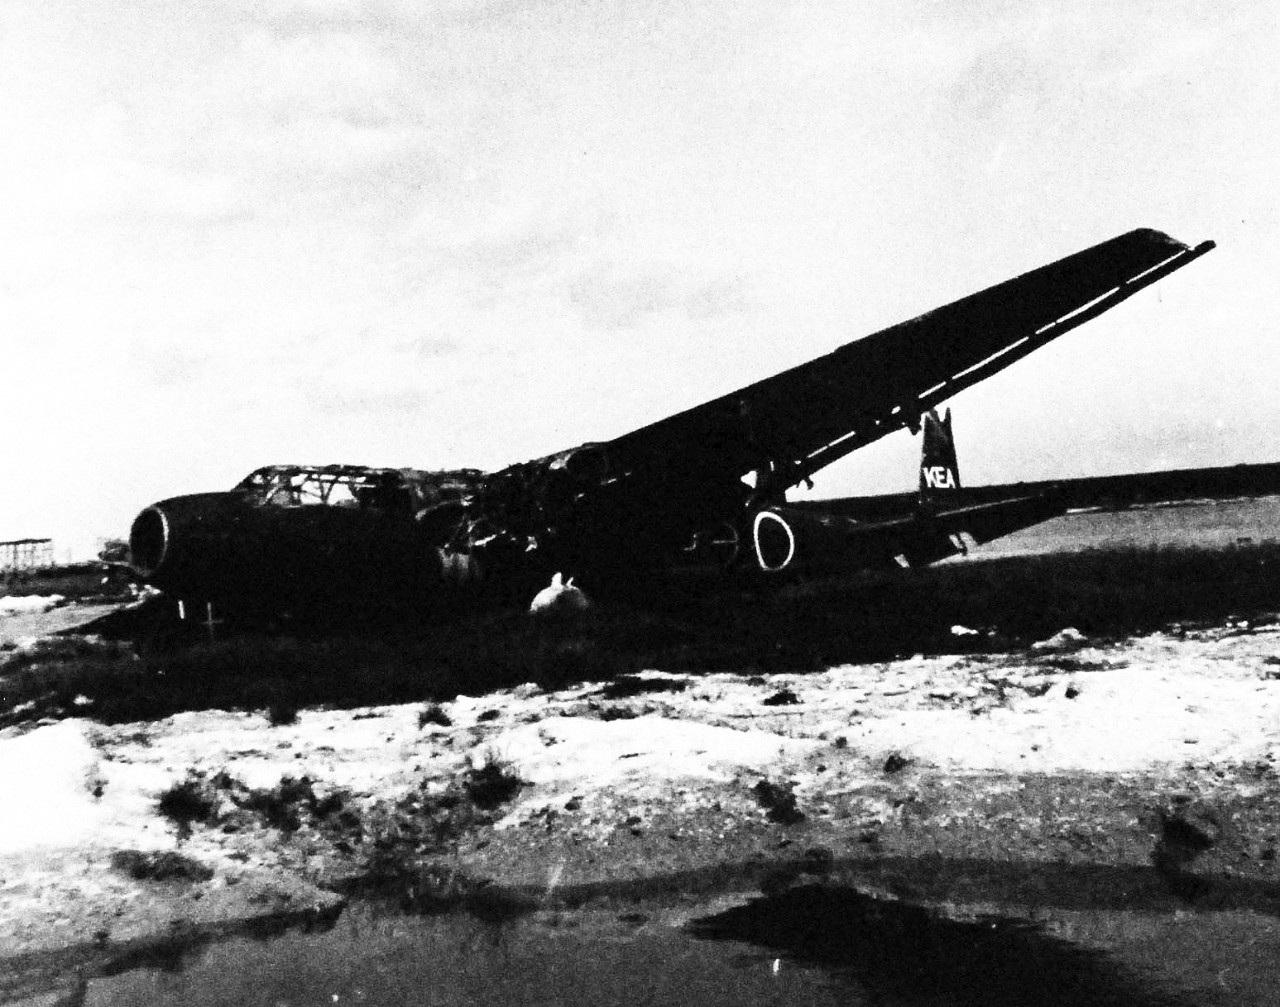 80-G-325332:  Okinawa Campaign, April-June 1945.  Group of smashed Japanese aircraft in the revetments of the airstrip at Naha, Okinawa, Ryukyu Islands.  This specific aircraft is a Kawasaki K-61, nicknamed “Tony”.     Photograph received 6 July 1945.  Official U.S. Navy Photograph, now in the collections of the National Archives.   (2014/5/1). 